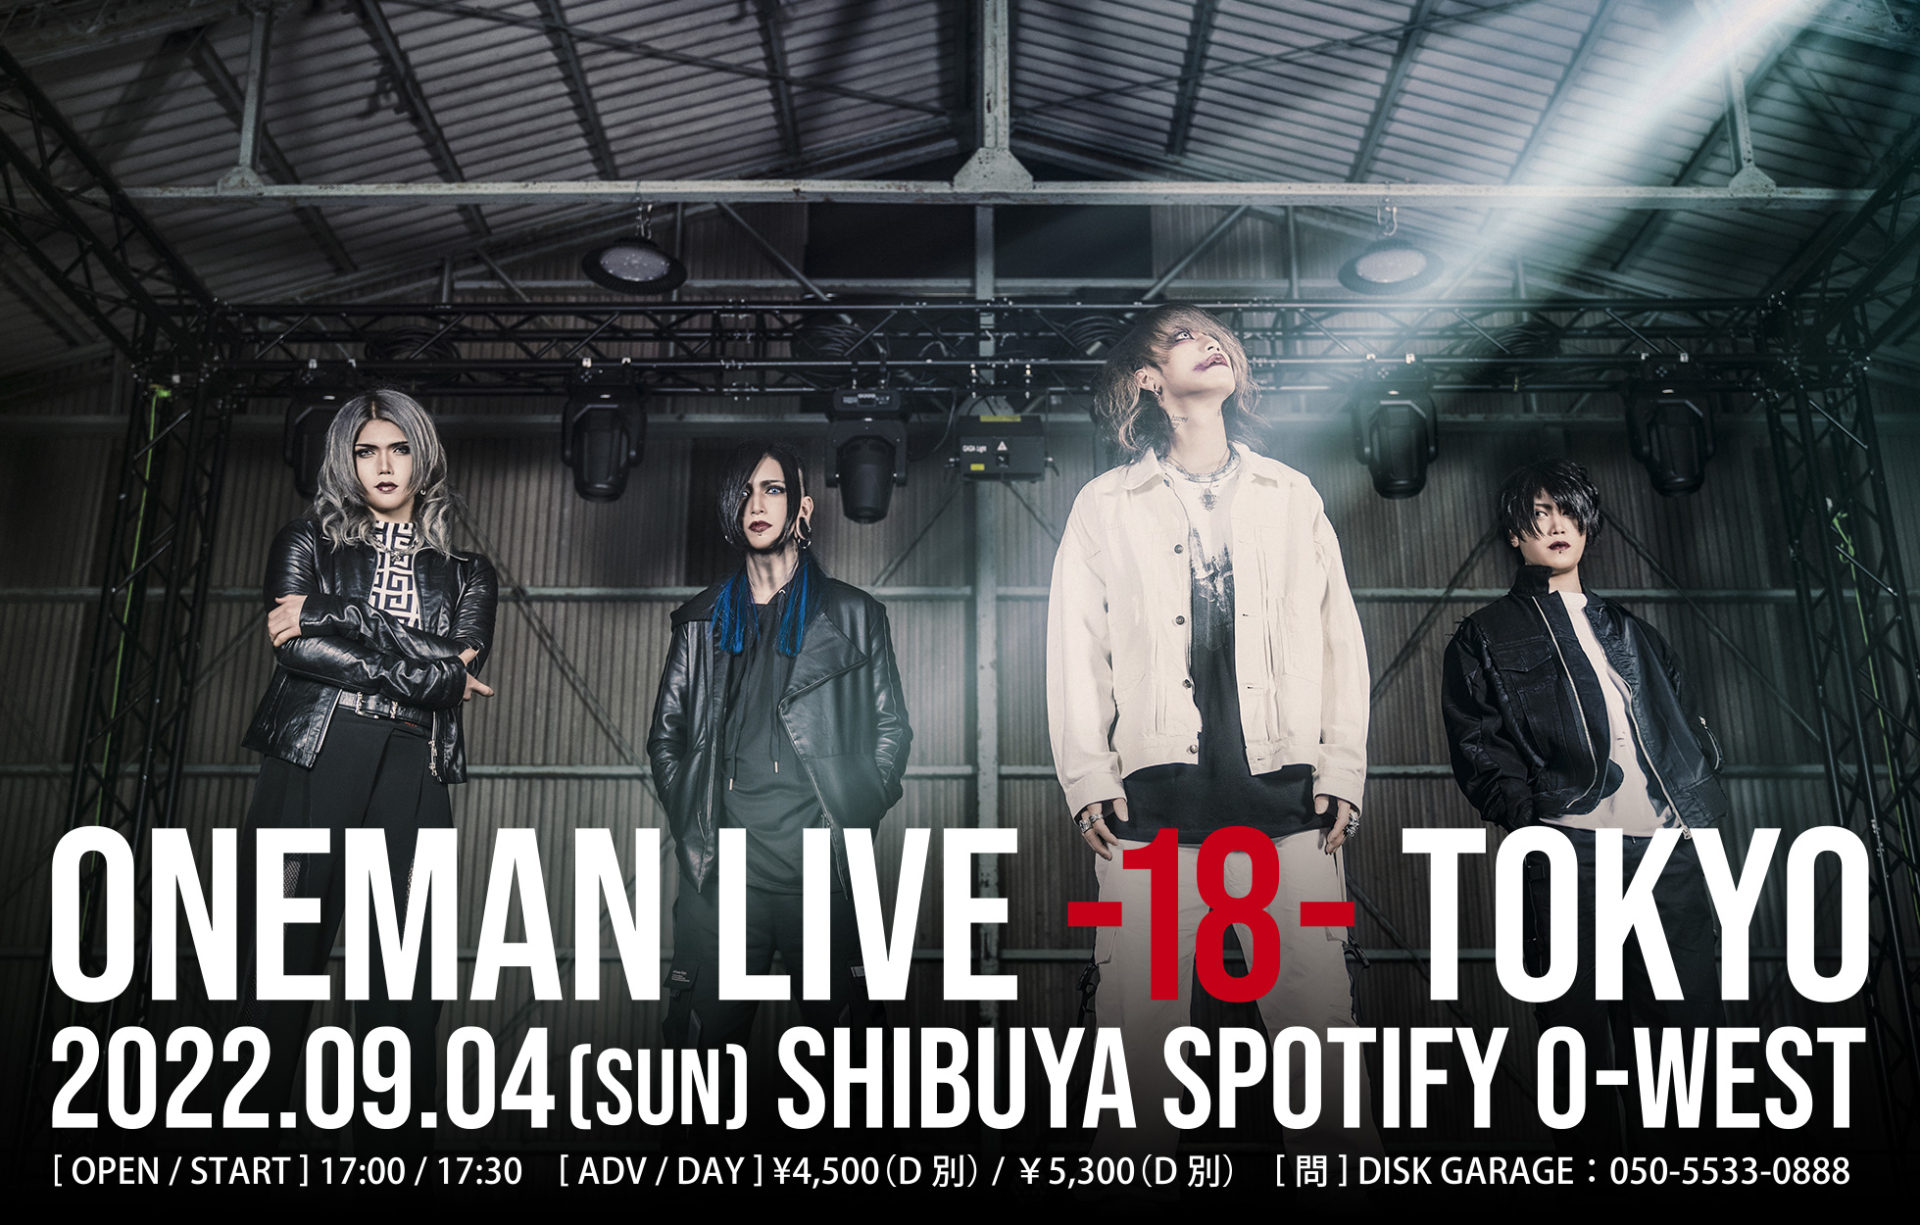 DEXCORE Oneman Live “-18-” TOKYO | Spotify O-EAST・O-WEST・O-Crest 